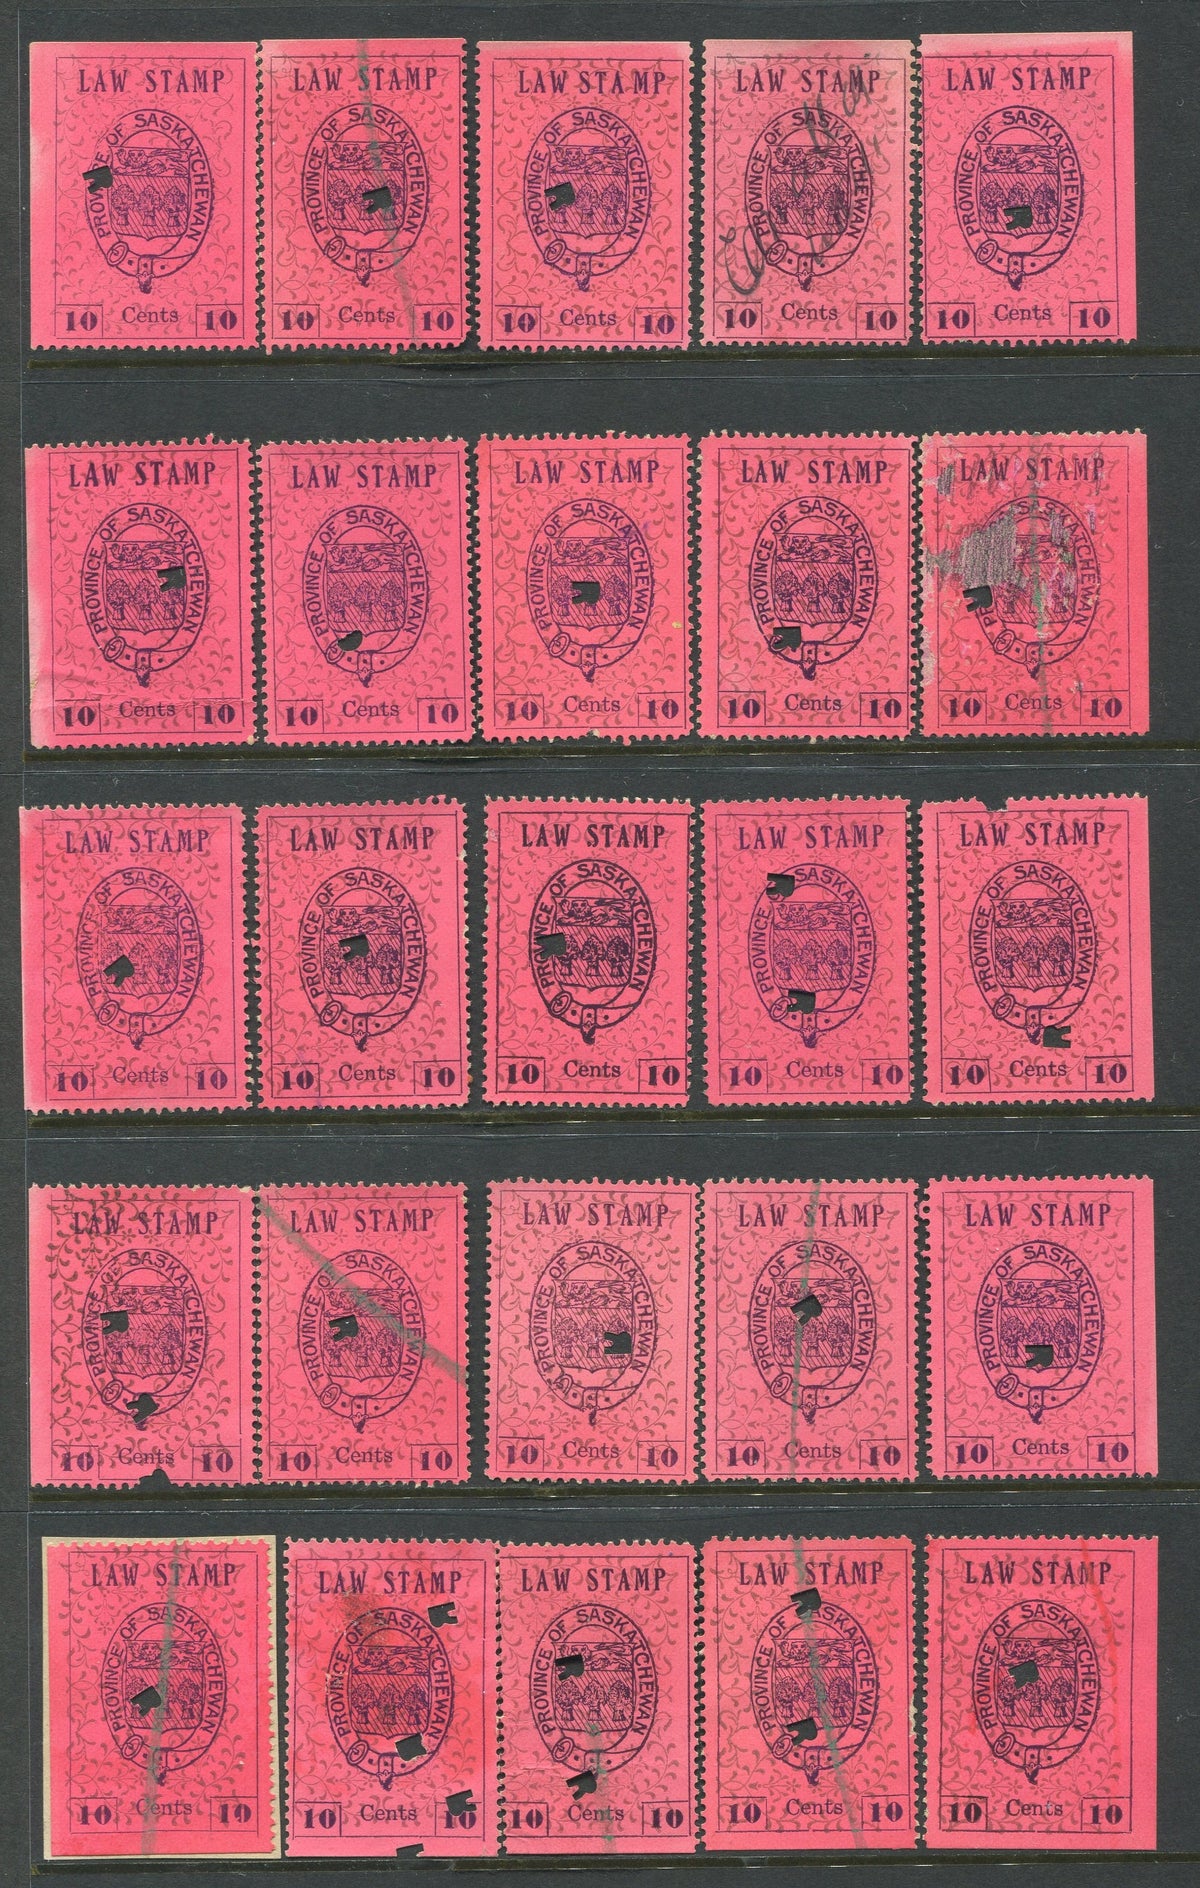 0002SL1709 - SL2 - Used Reconstructed Sheet - Deveney Stamps Ltd. Canadian Stamps